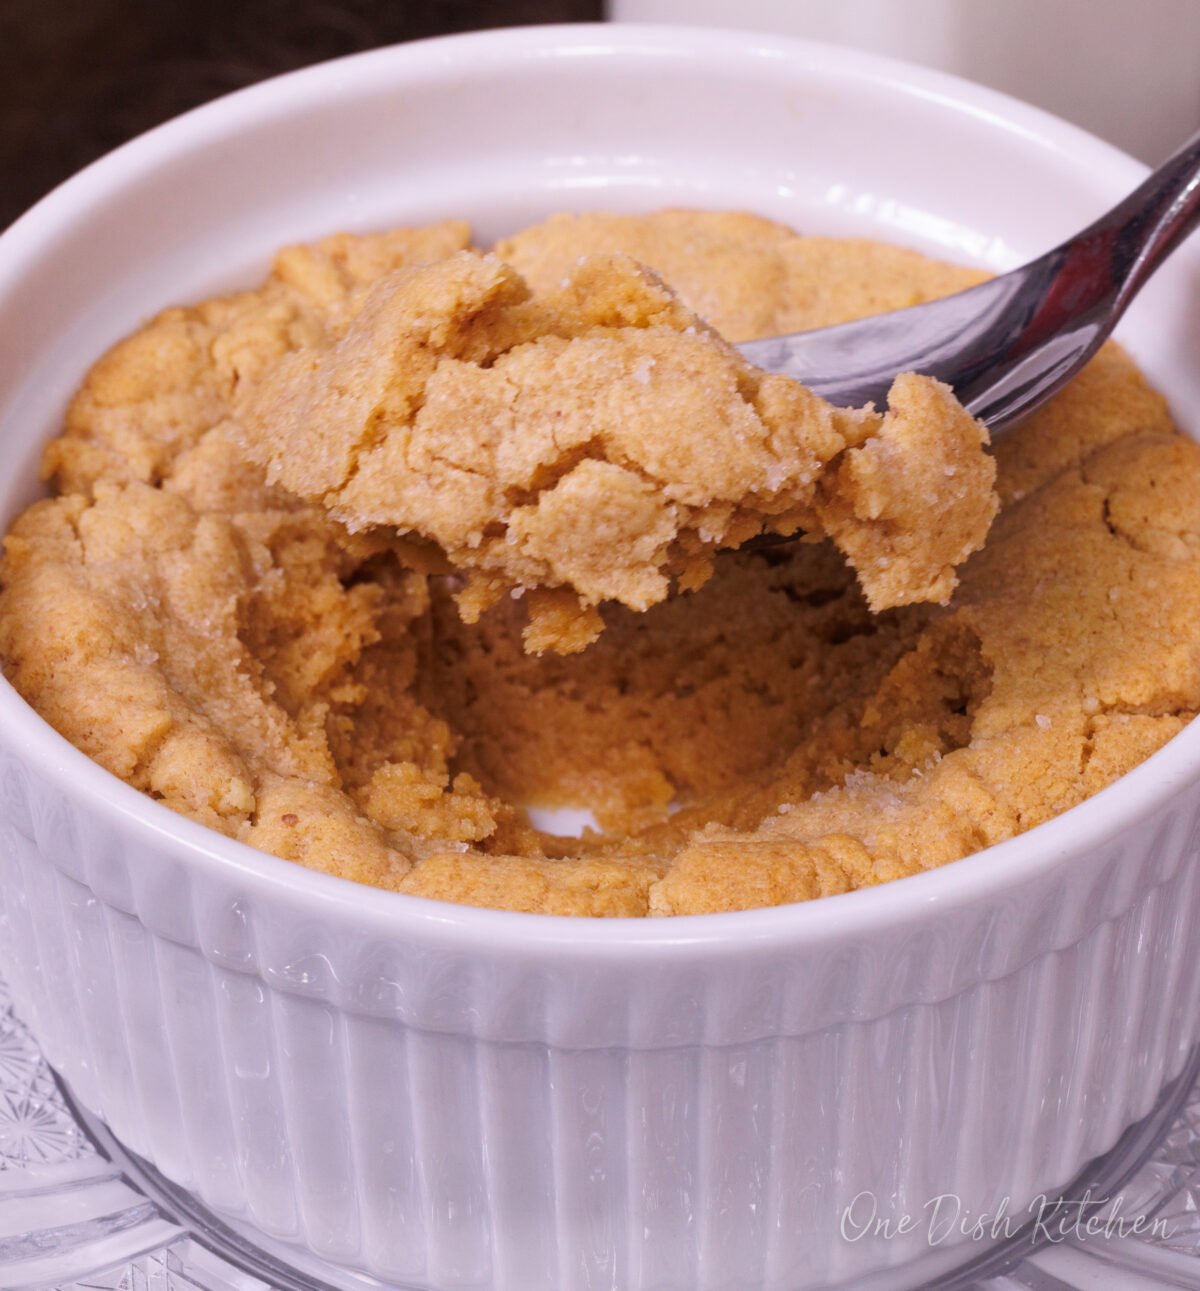 a peanut butter cookie eaten with a spoon from a small ramekin.